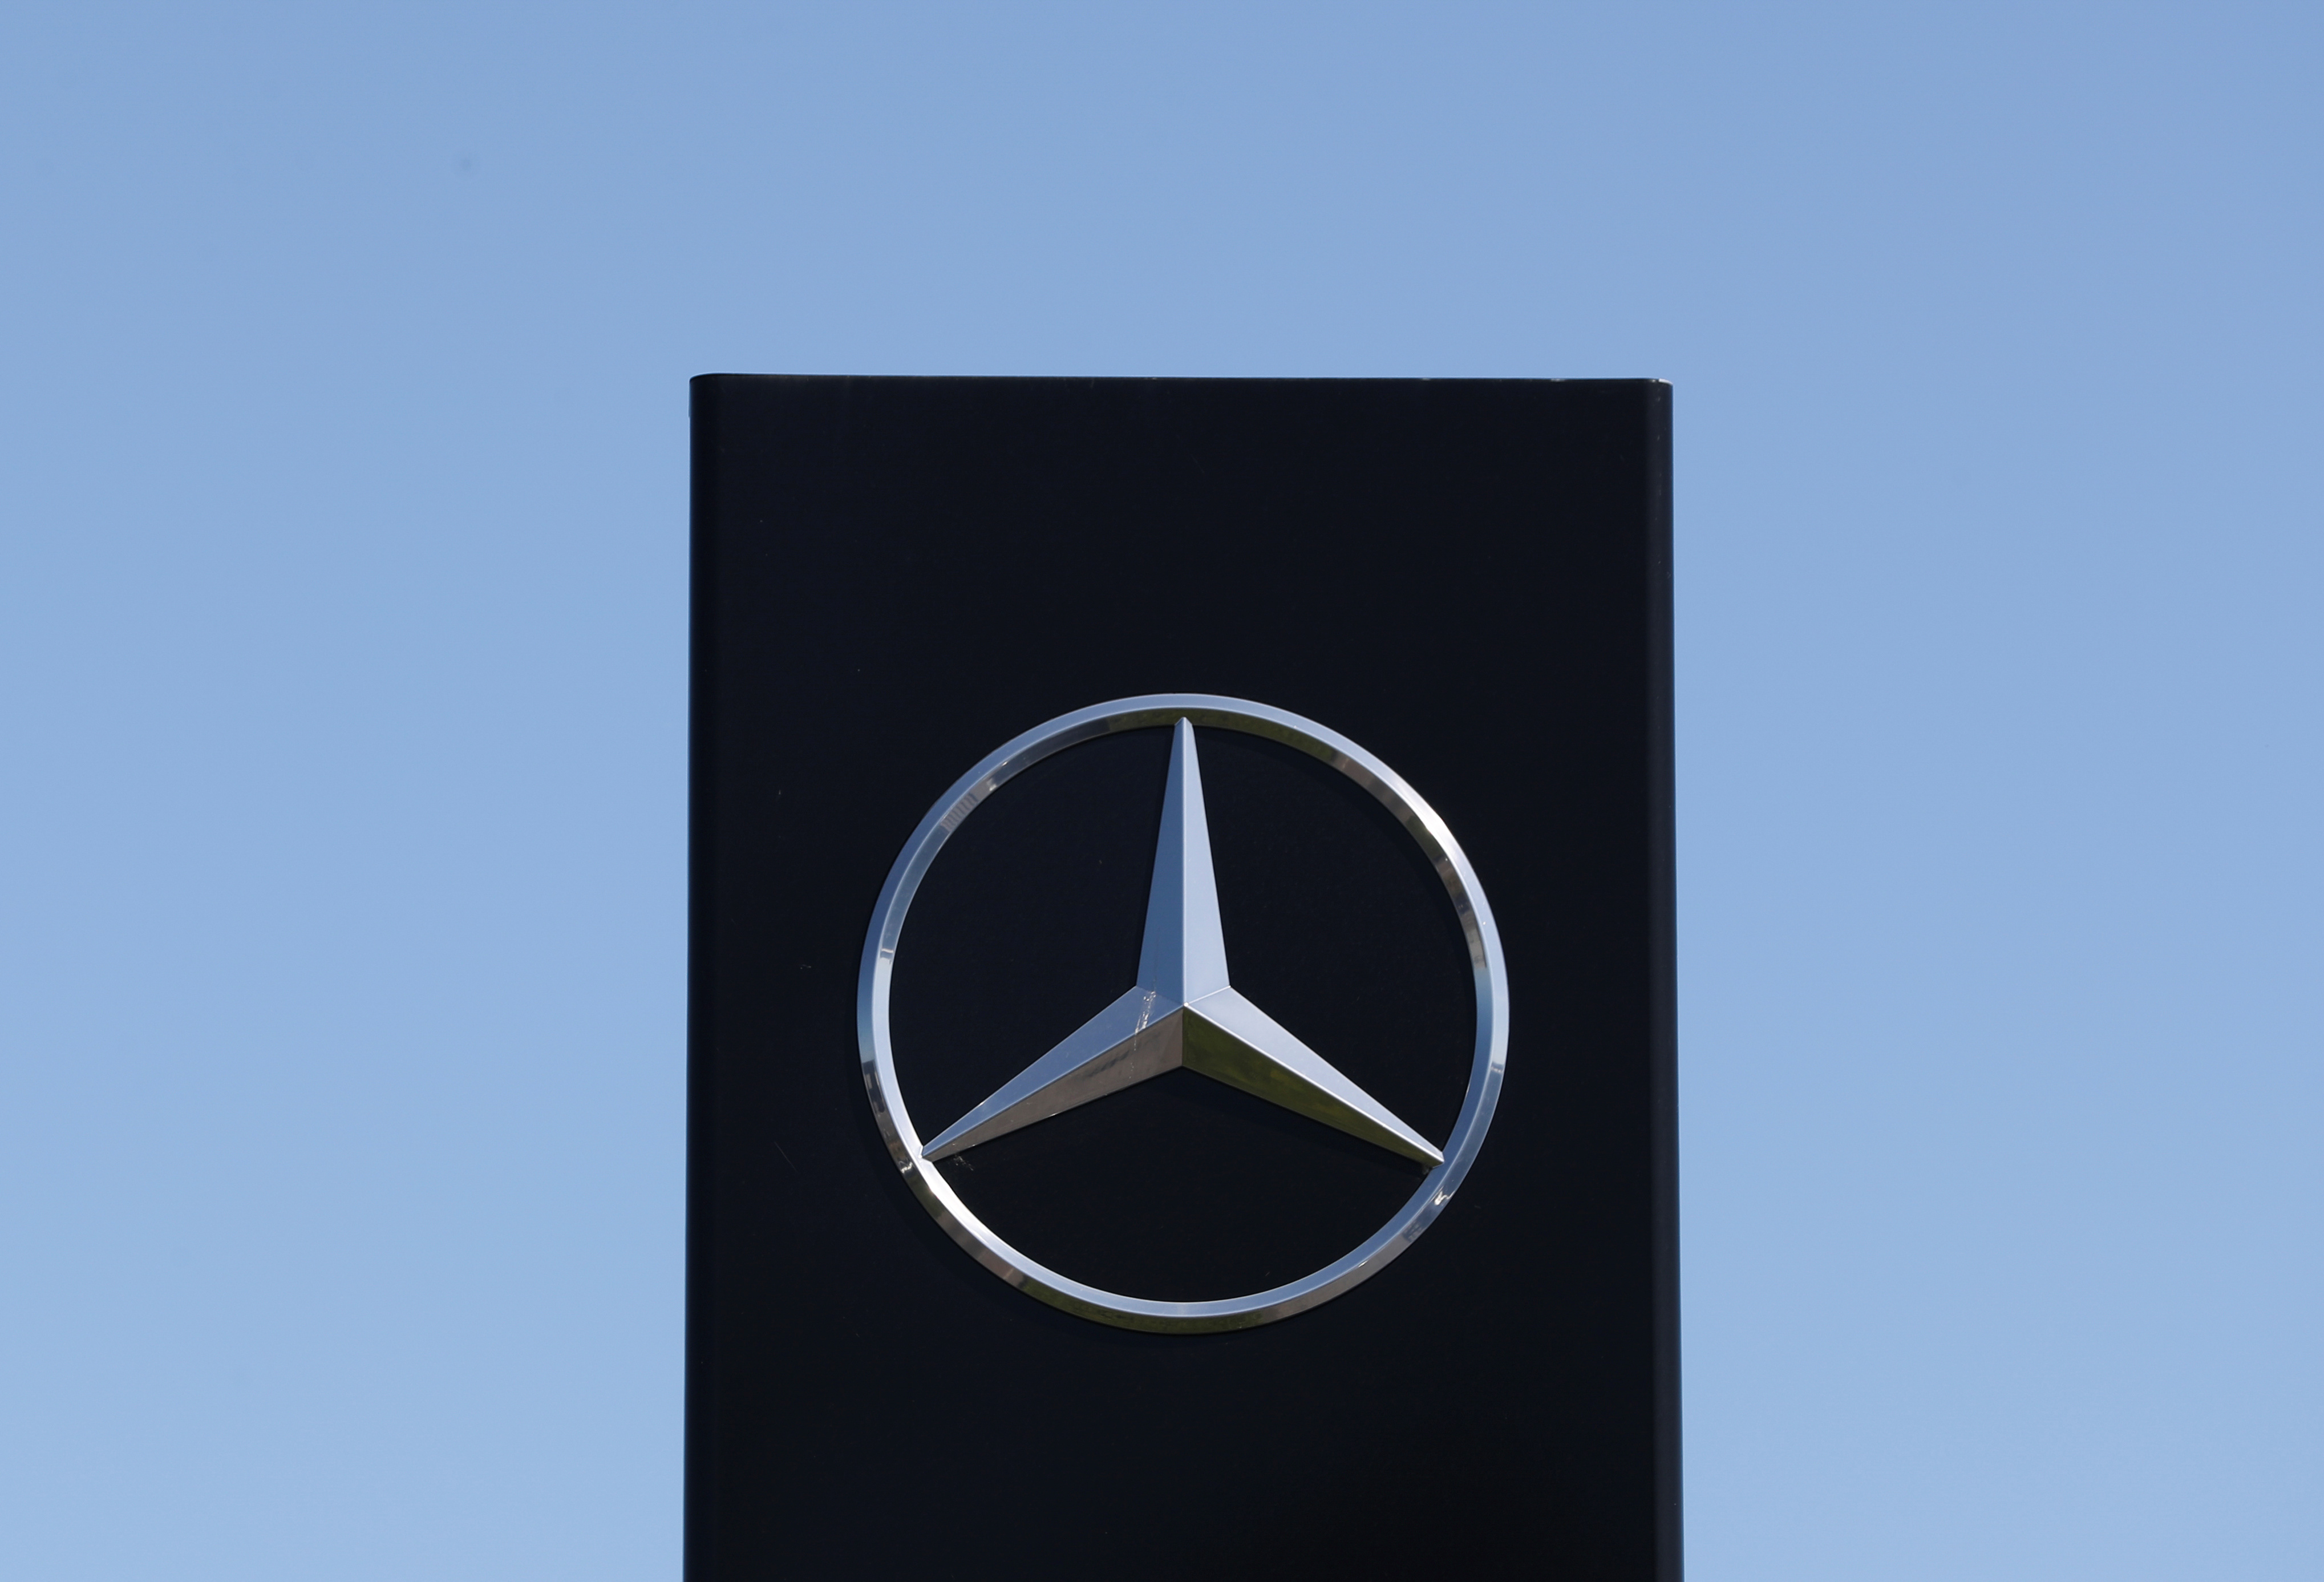 A logo of Mercedes-Benz is seen outside a Mercedes-Benz car dealer, amid the coronavirus disease (COVID-19) outbreak in Brussels